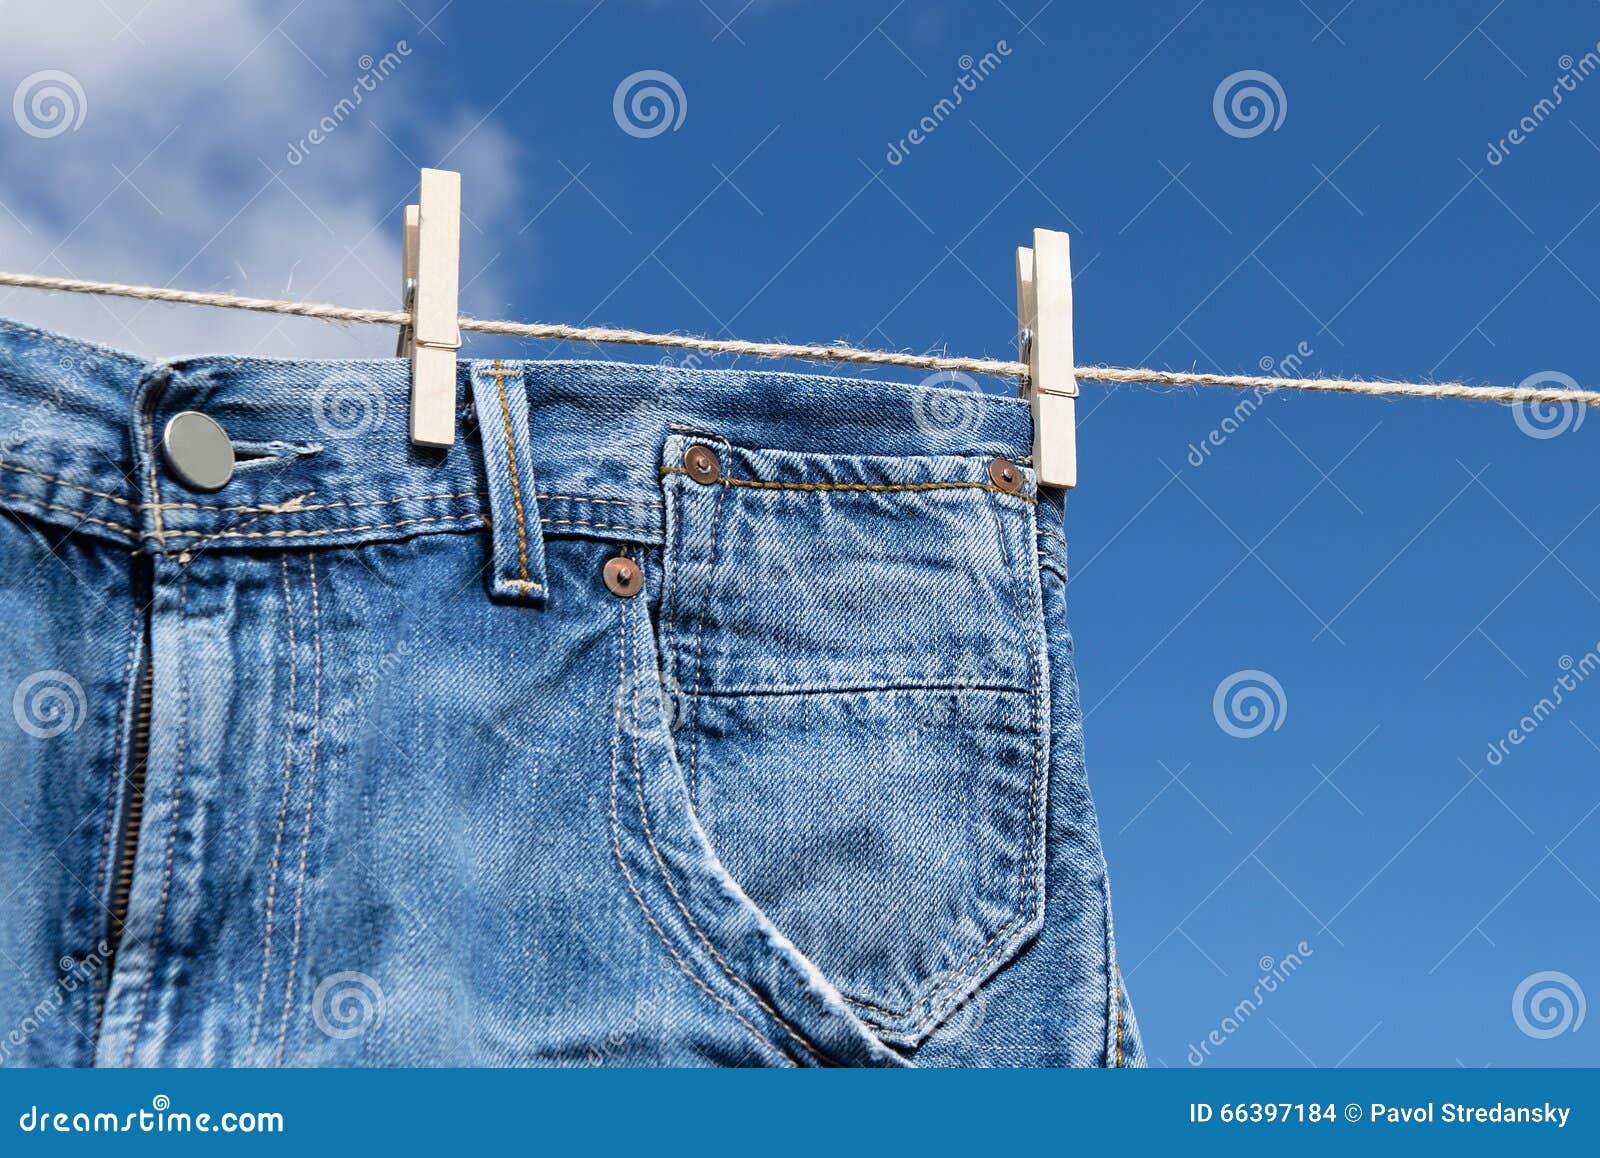 Jeans on a clothesline stock photo. Image of washing - 66397184